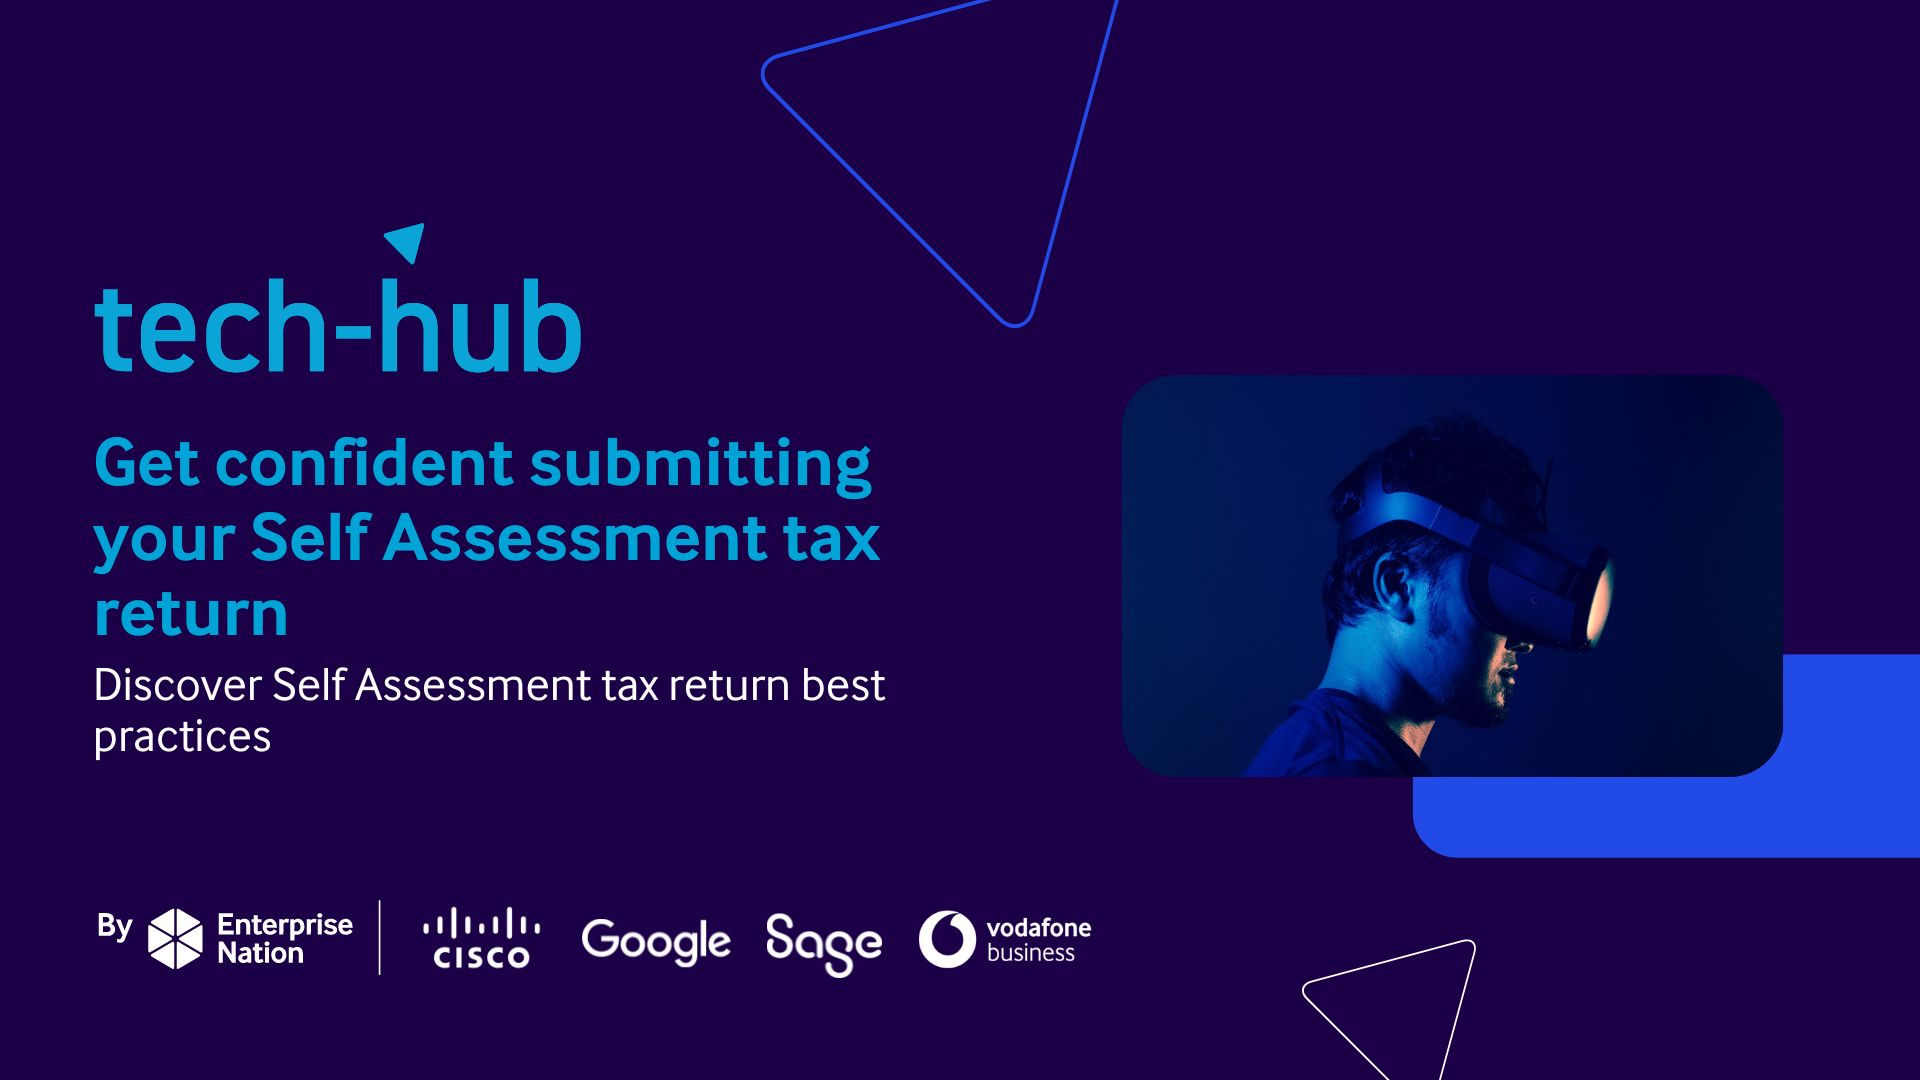 Tech Hub: Get confident submitting your Self Assessment tax return